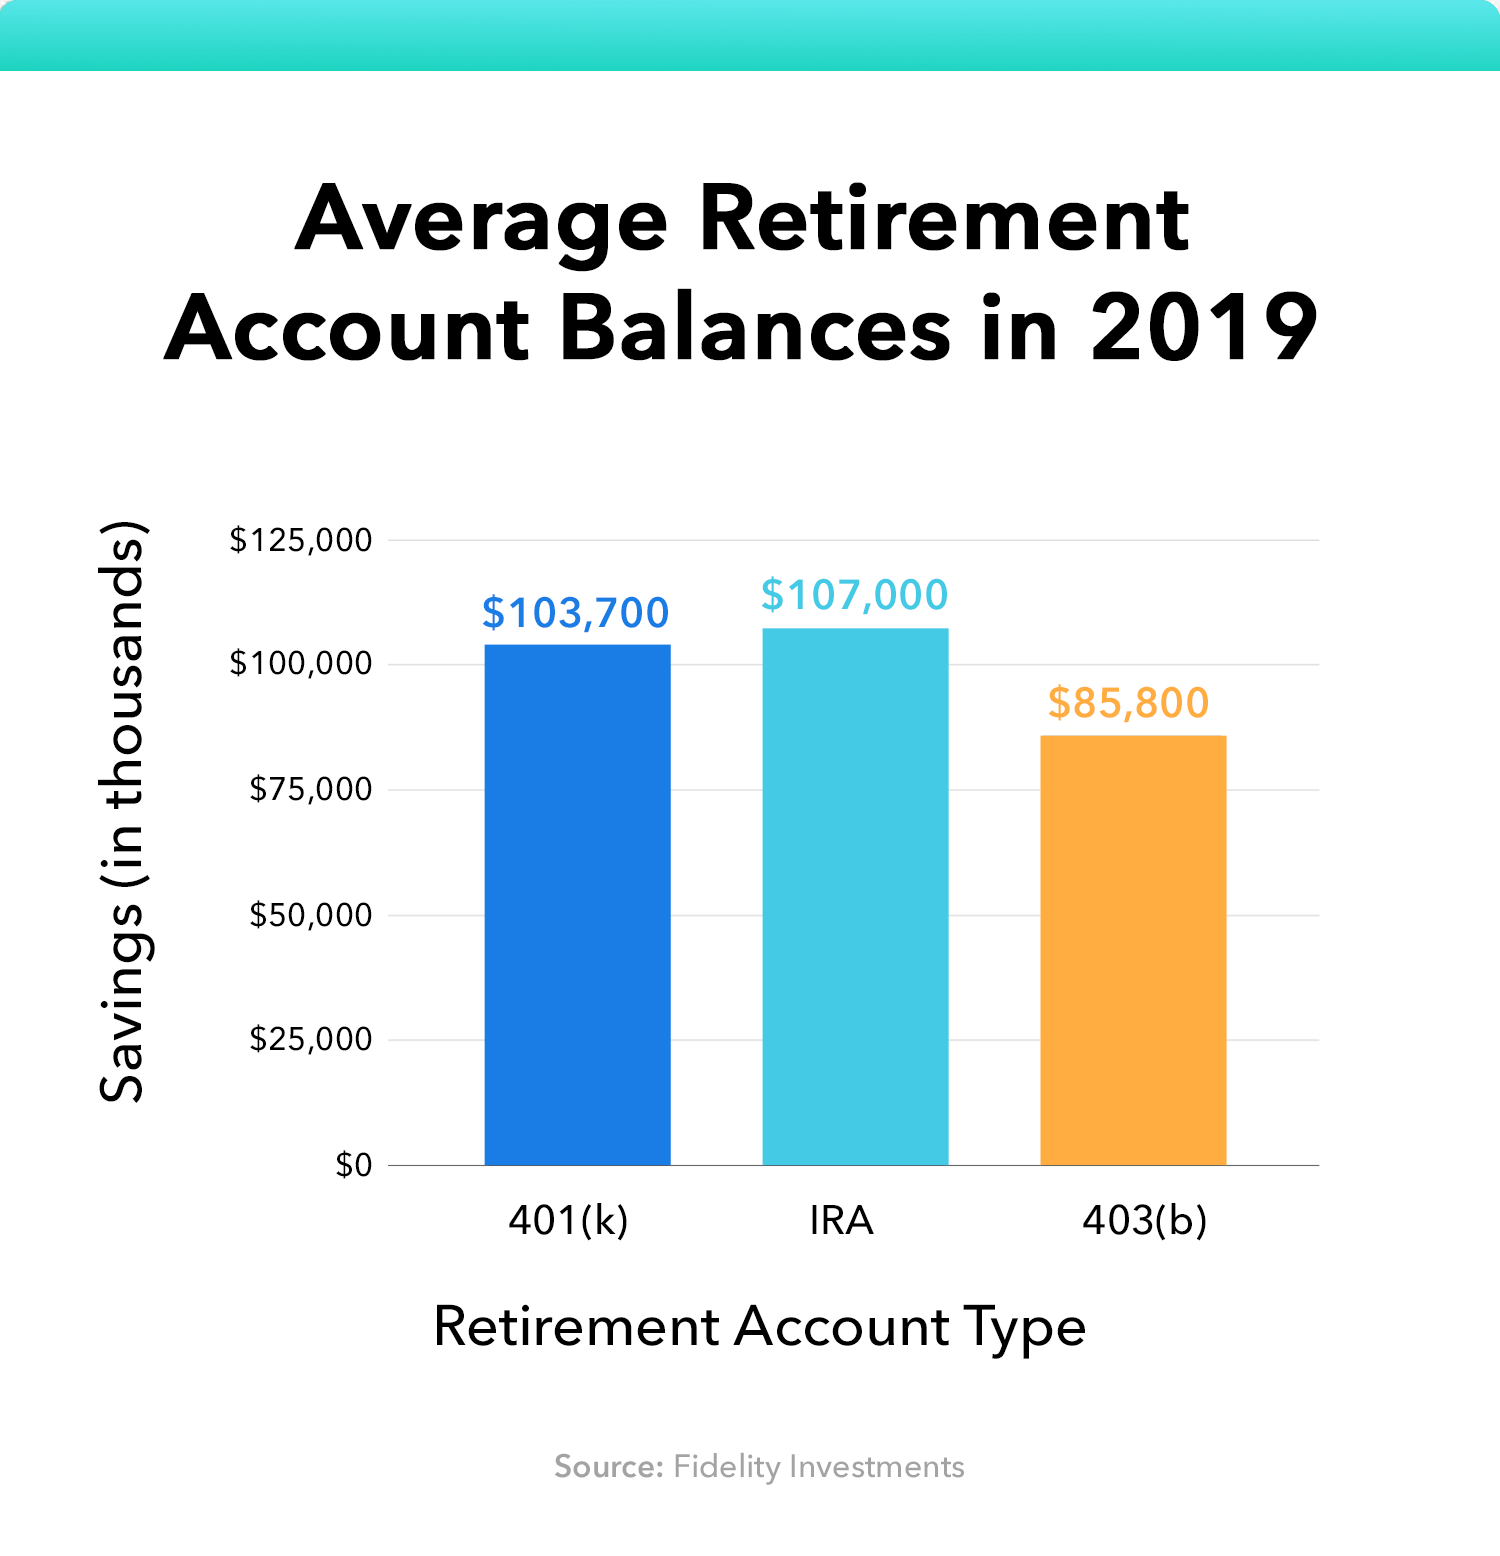 how much you need to retire